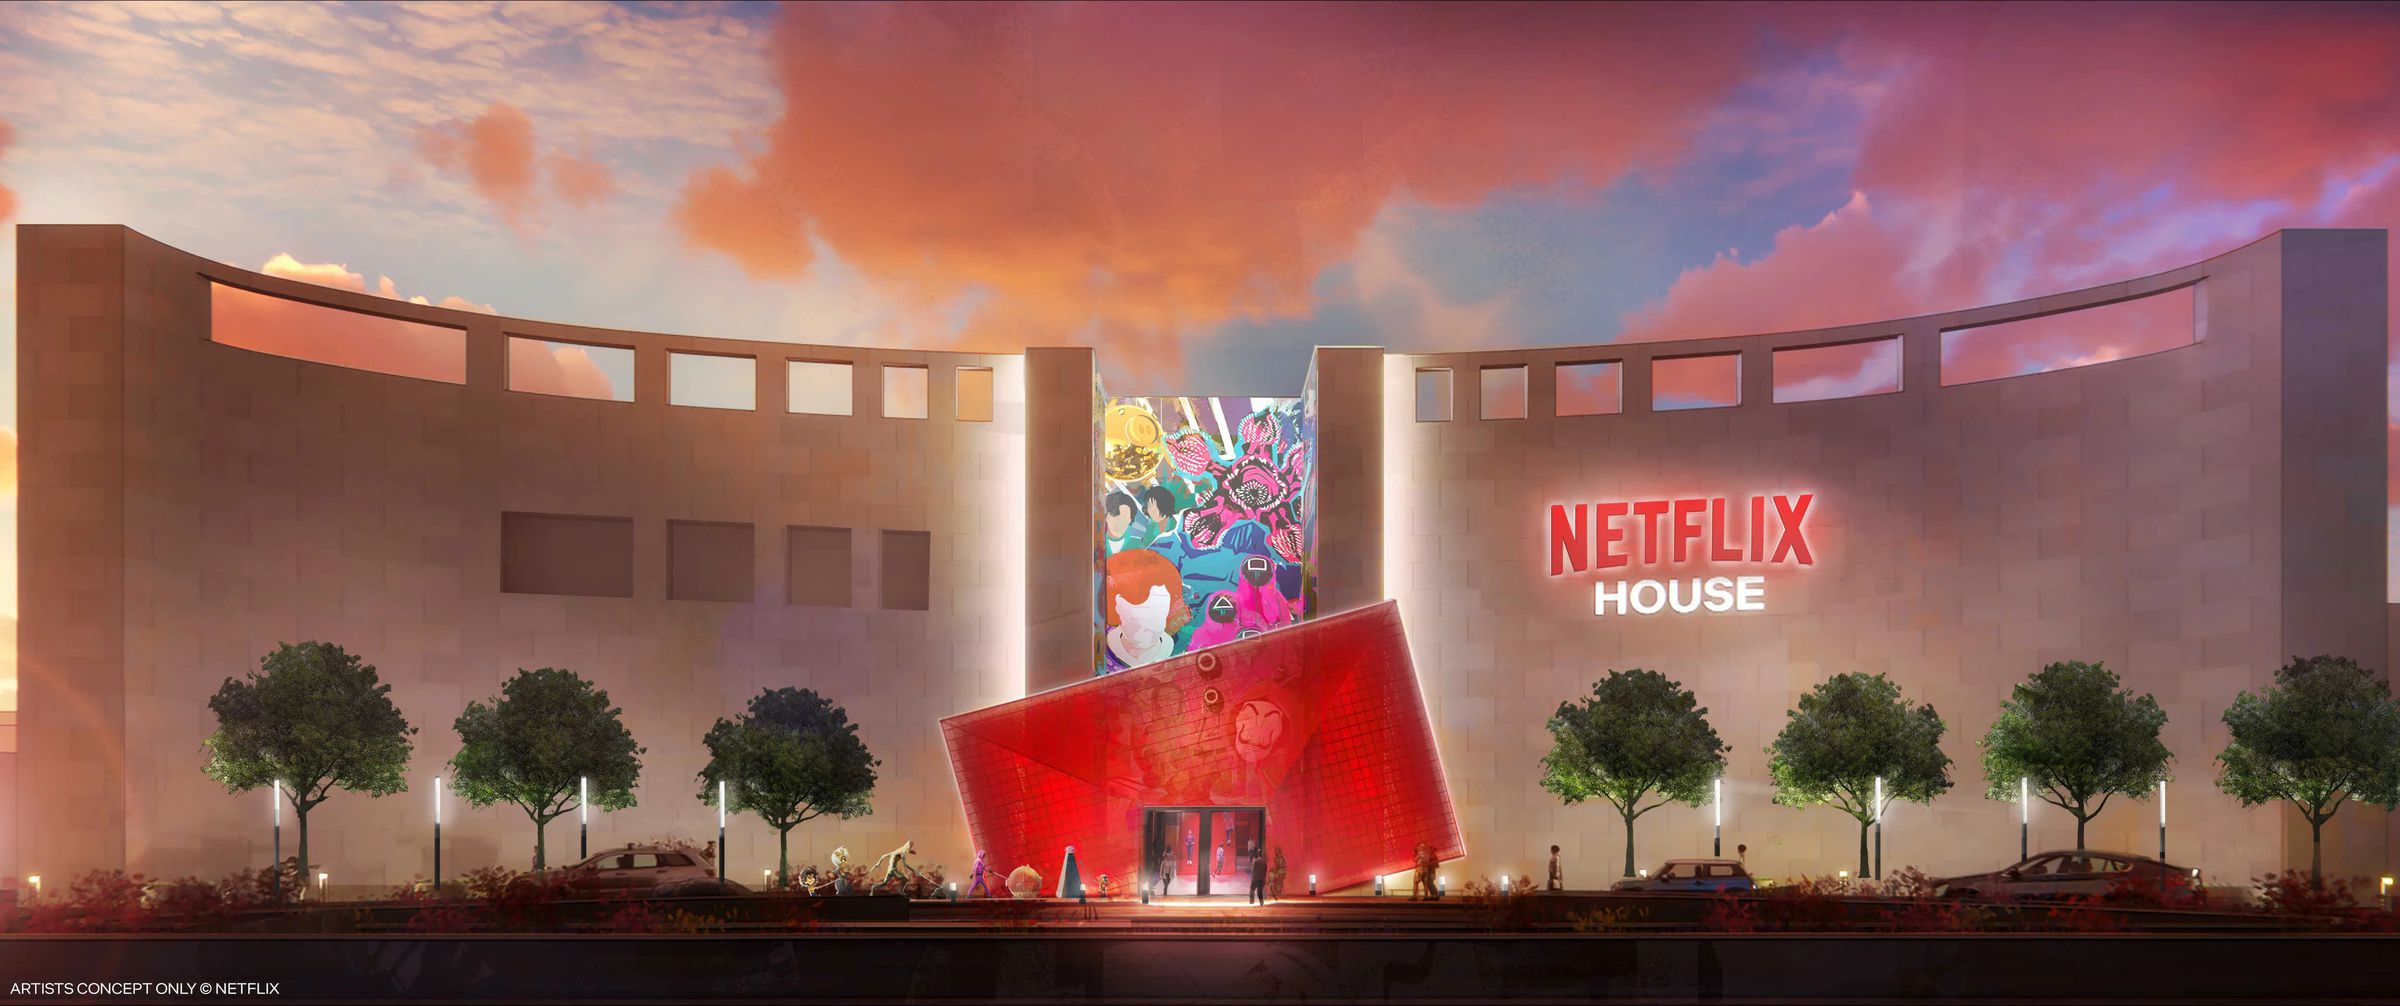 A concept rendering of a “Netflix House” location as a massive storefront with a red envelope on the building and people and cars in front.